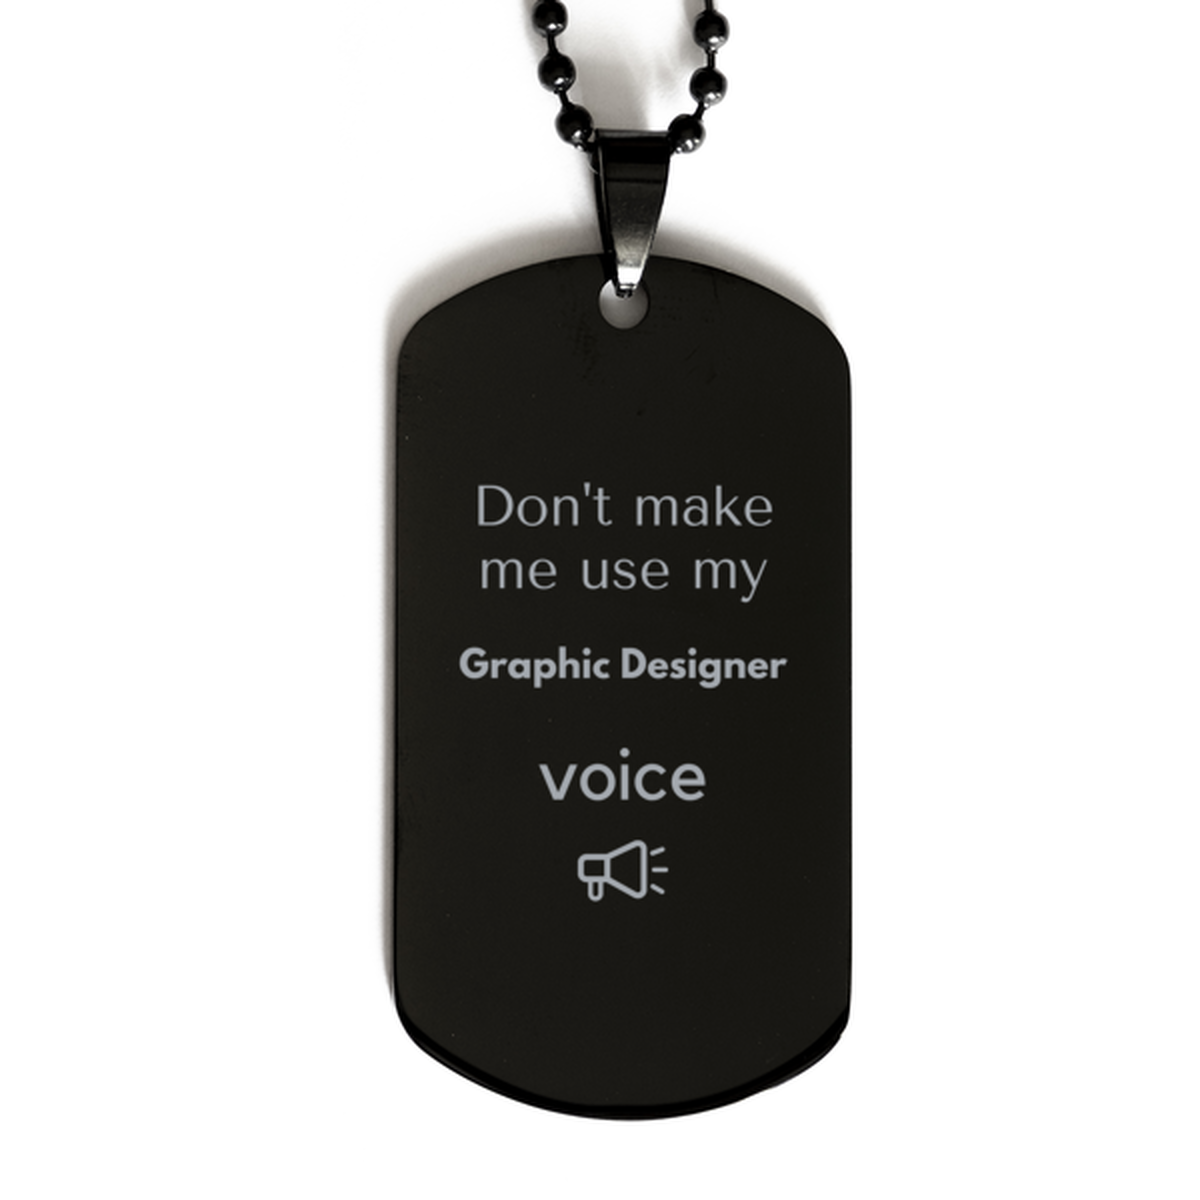 Don't make me use my Graphic Designer voice, Sarcasm Graphic Designer Gifts, Christmas Graphic Designer Black Dog Tag Birthday Unique Gifts For Graphic Designer Coworkers, Men, Women, Colleague, Friends